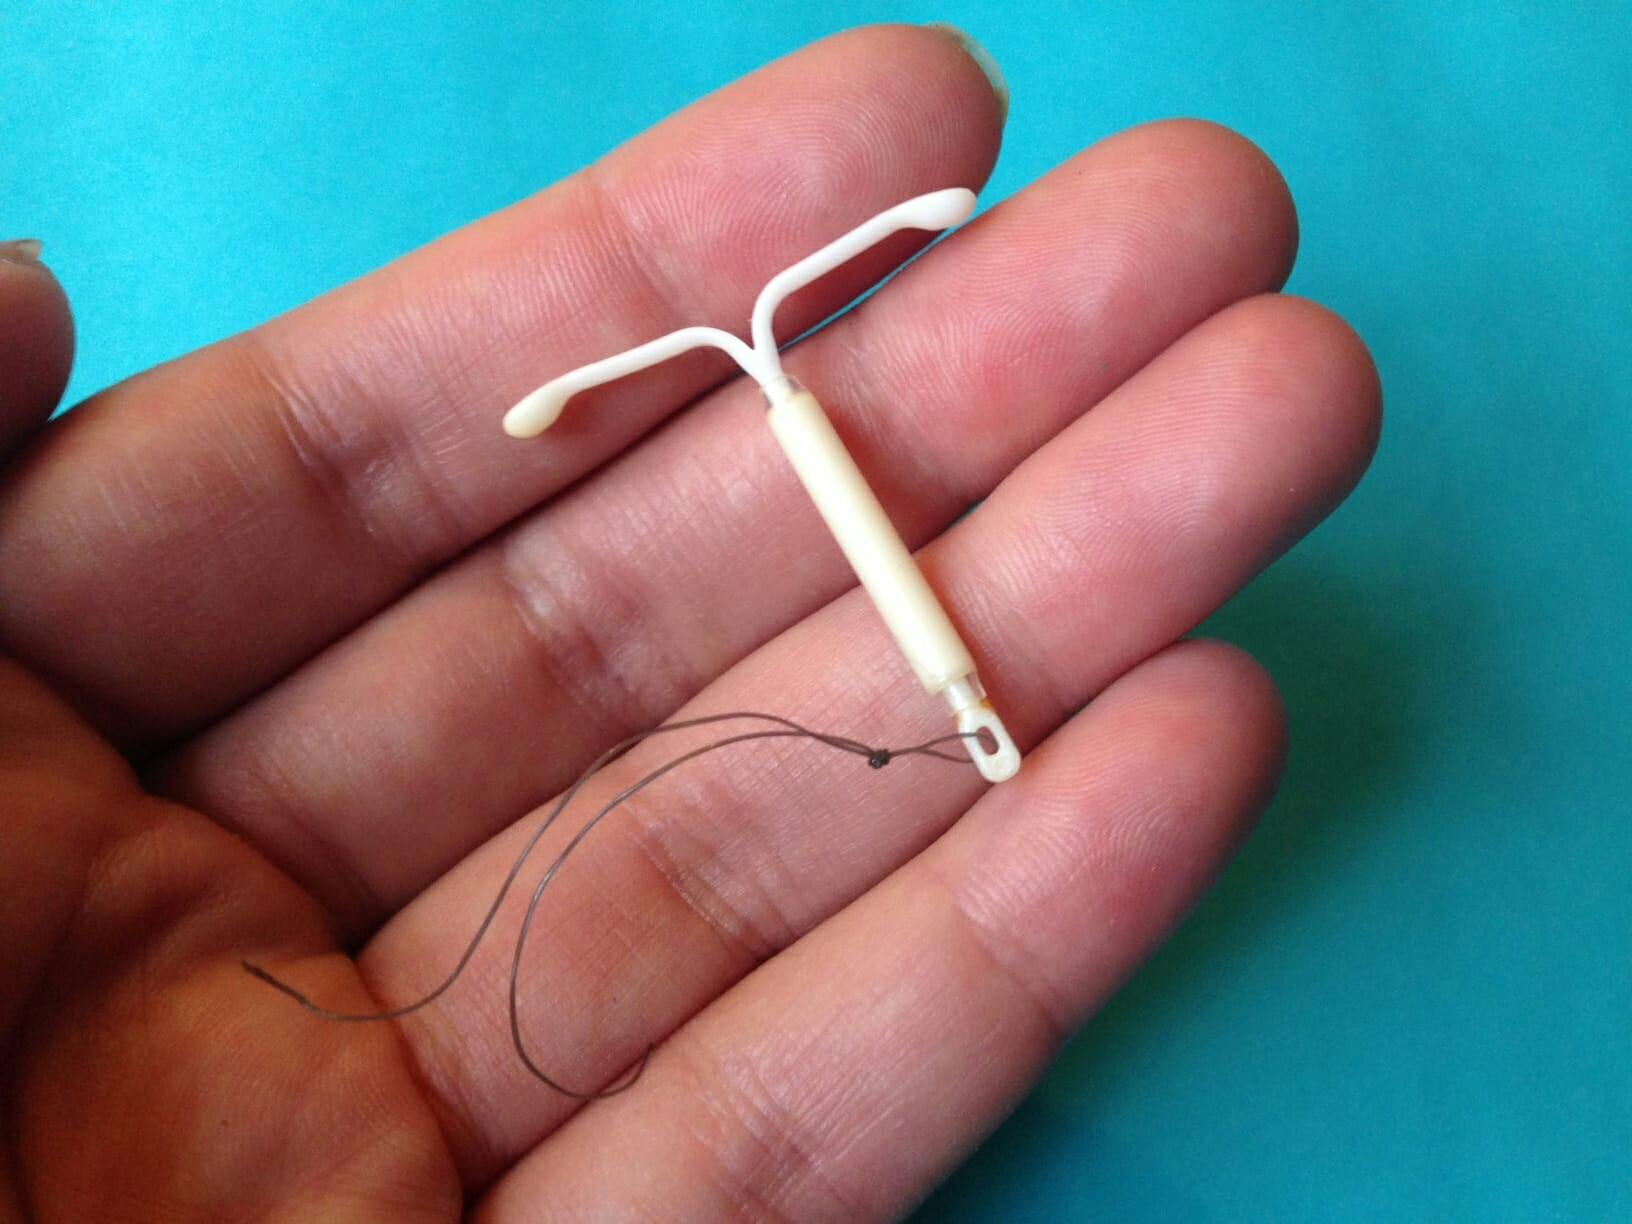 what is an iud : mirena iud